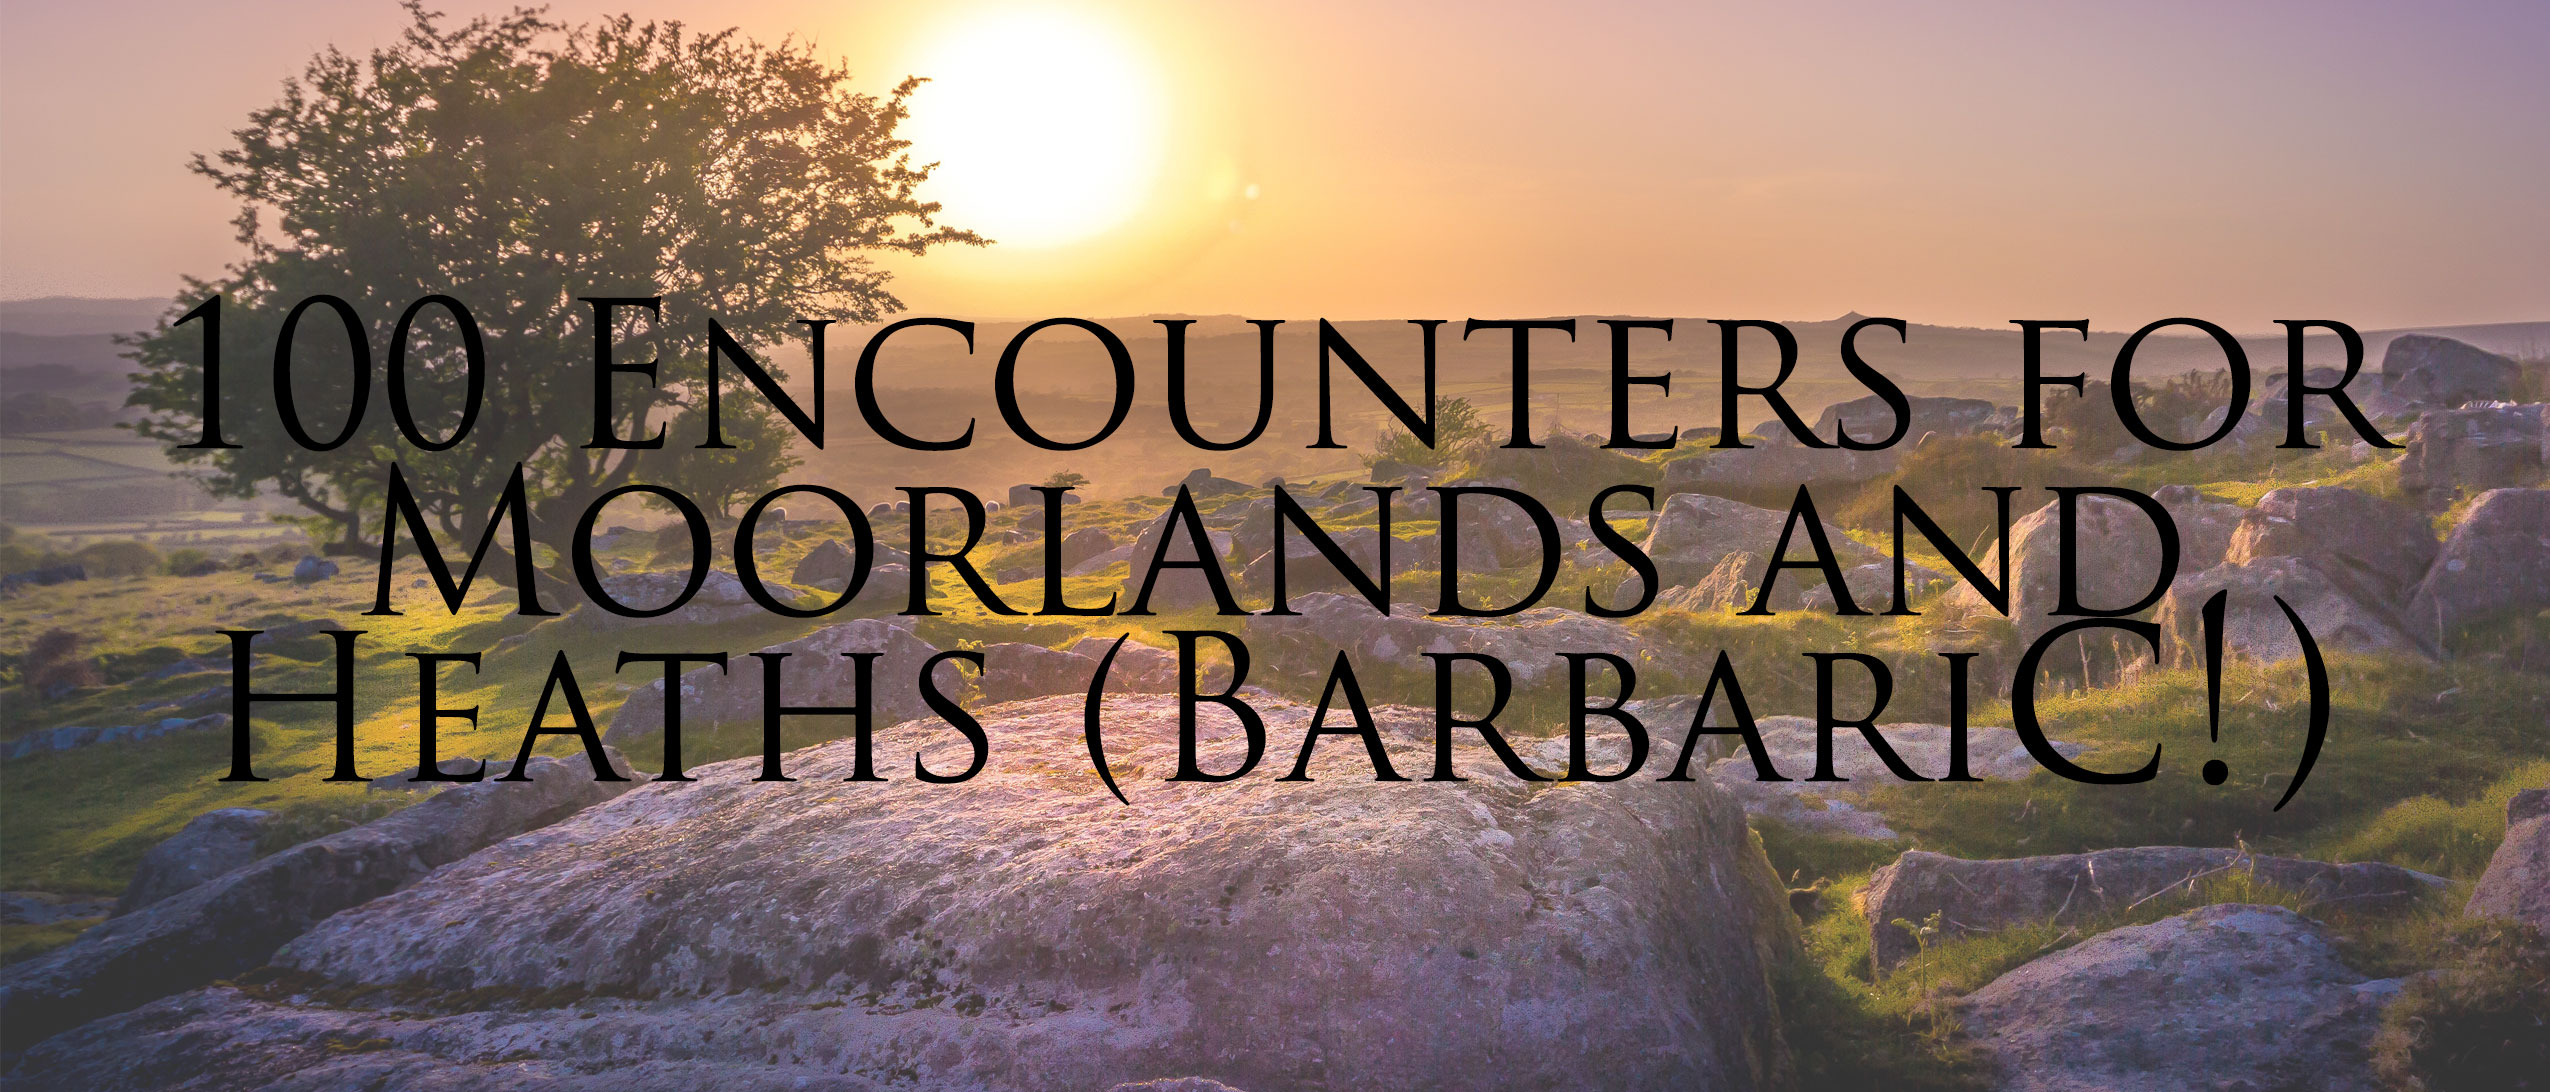 100 Encounters for Moorlands and Heaths (Barbaric!)